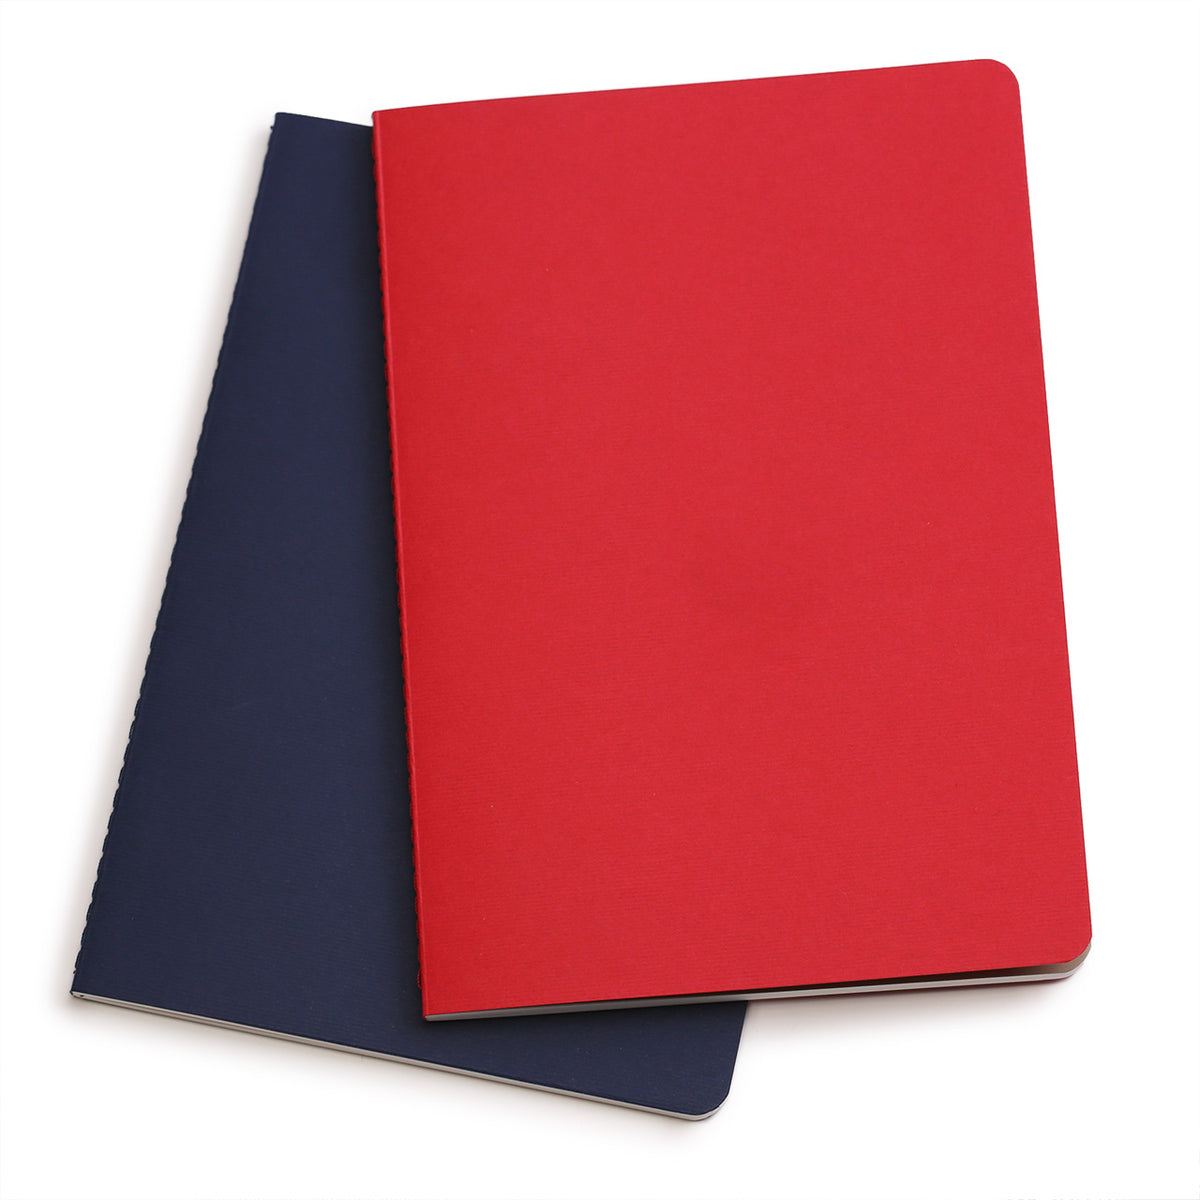 front covers of the red and blue myPaperclip A5 refill note books